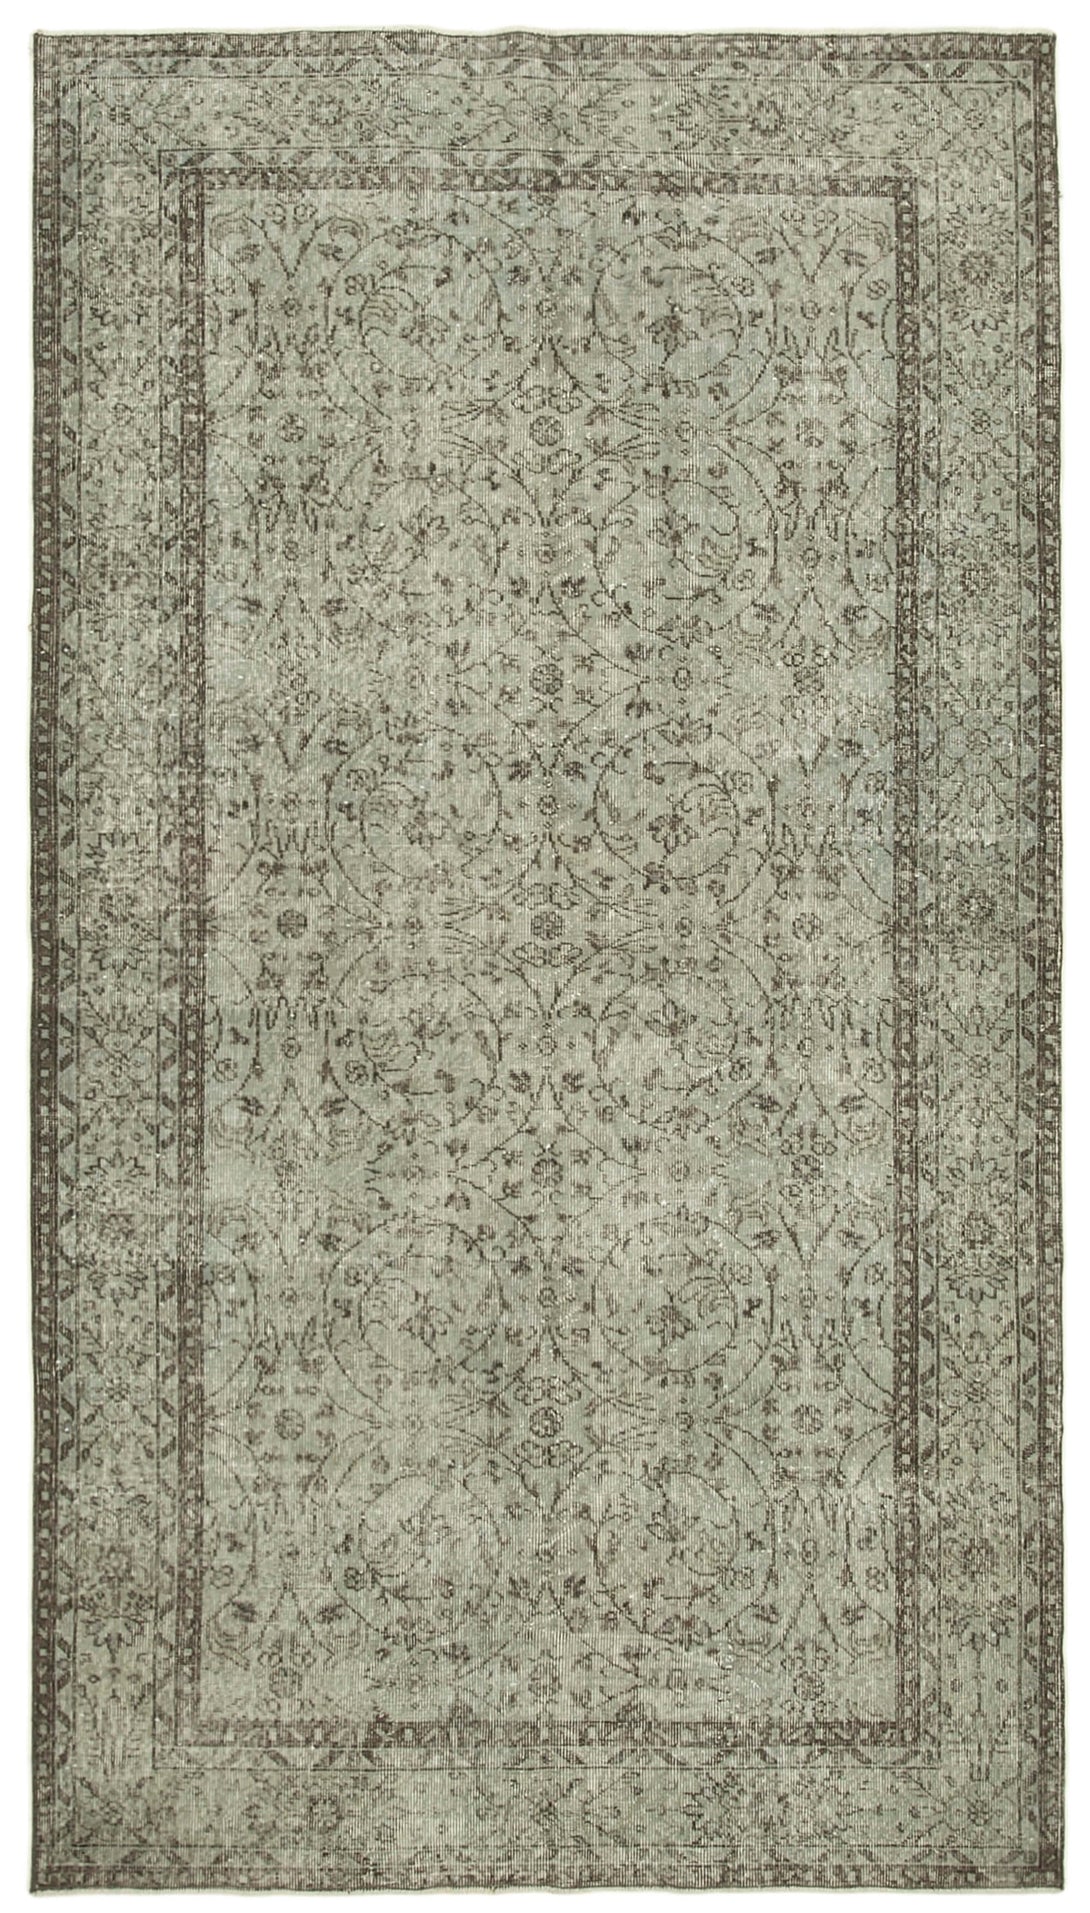 Handmade Overdyed Area Rug > Design# OL-AC-30644 > Size: 5'-4" x 9'-6", Carpet Culture Rugs, Handmade Rugs, NYC Rugs, New Rugs, Shop Rugs, Rug Store, Outlet Rugs, SoHo Rugs, Rugs in USA